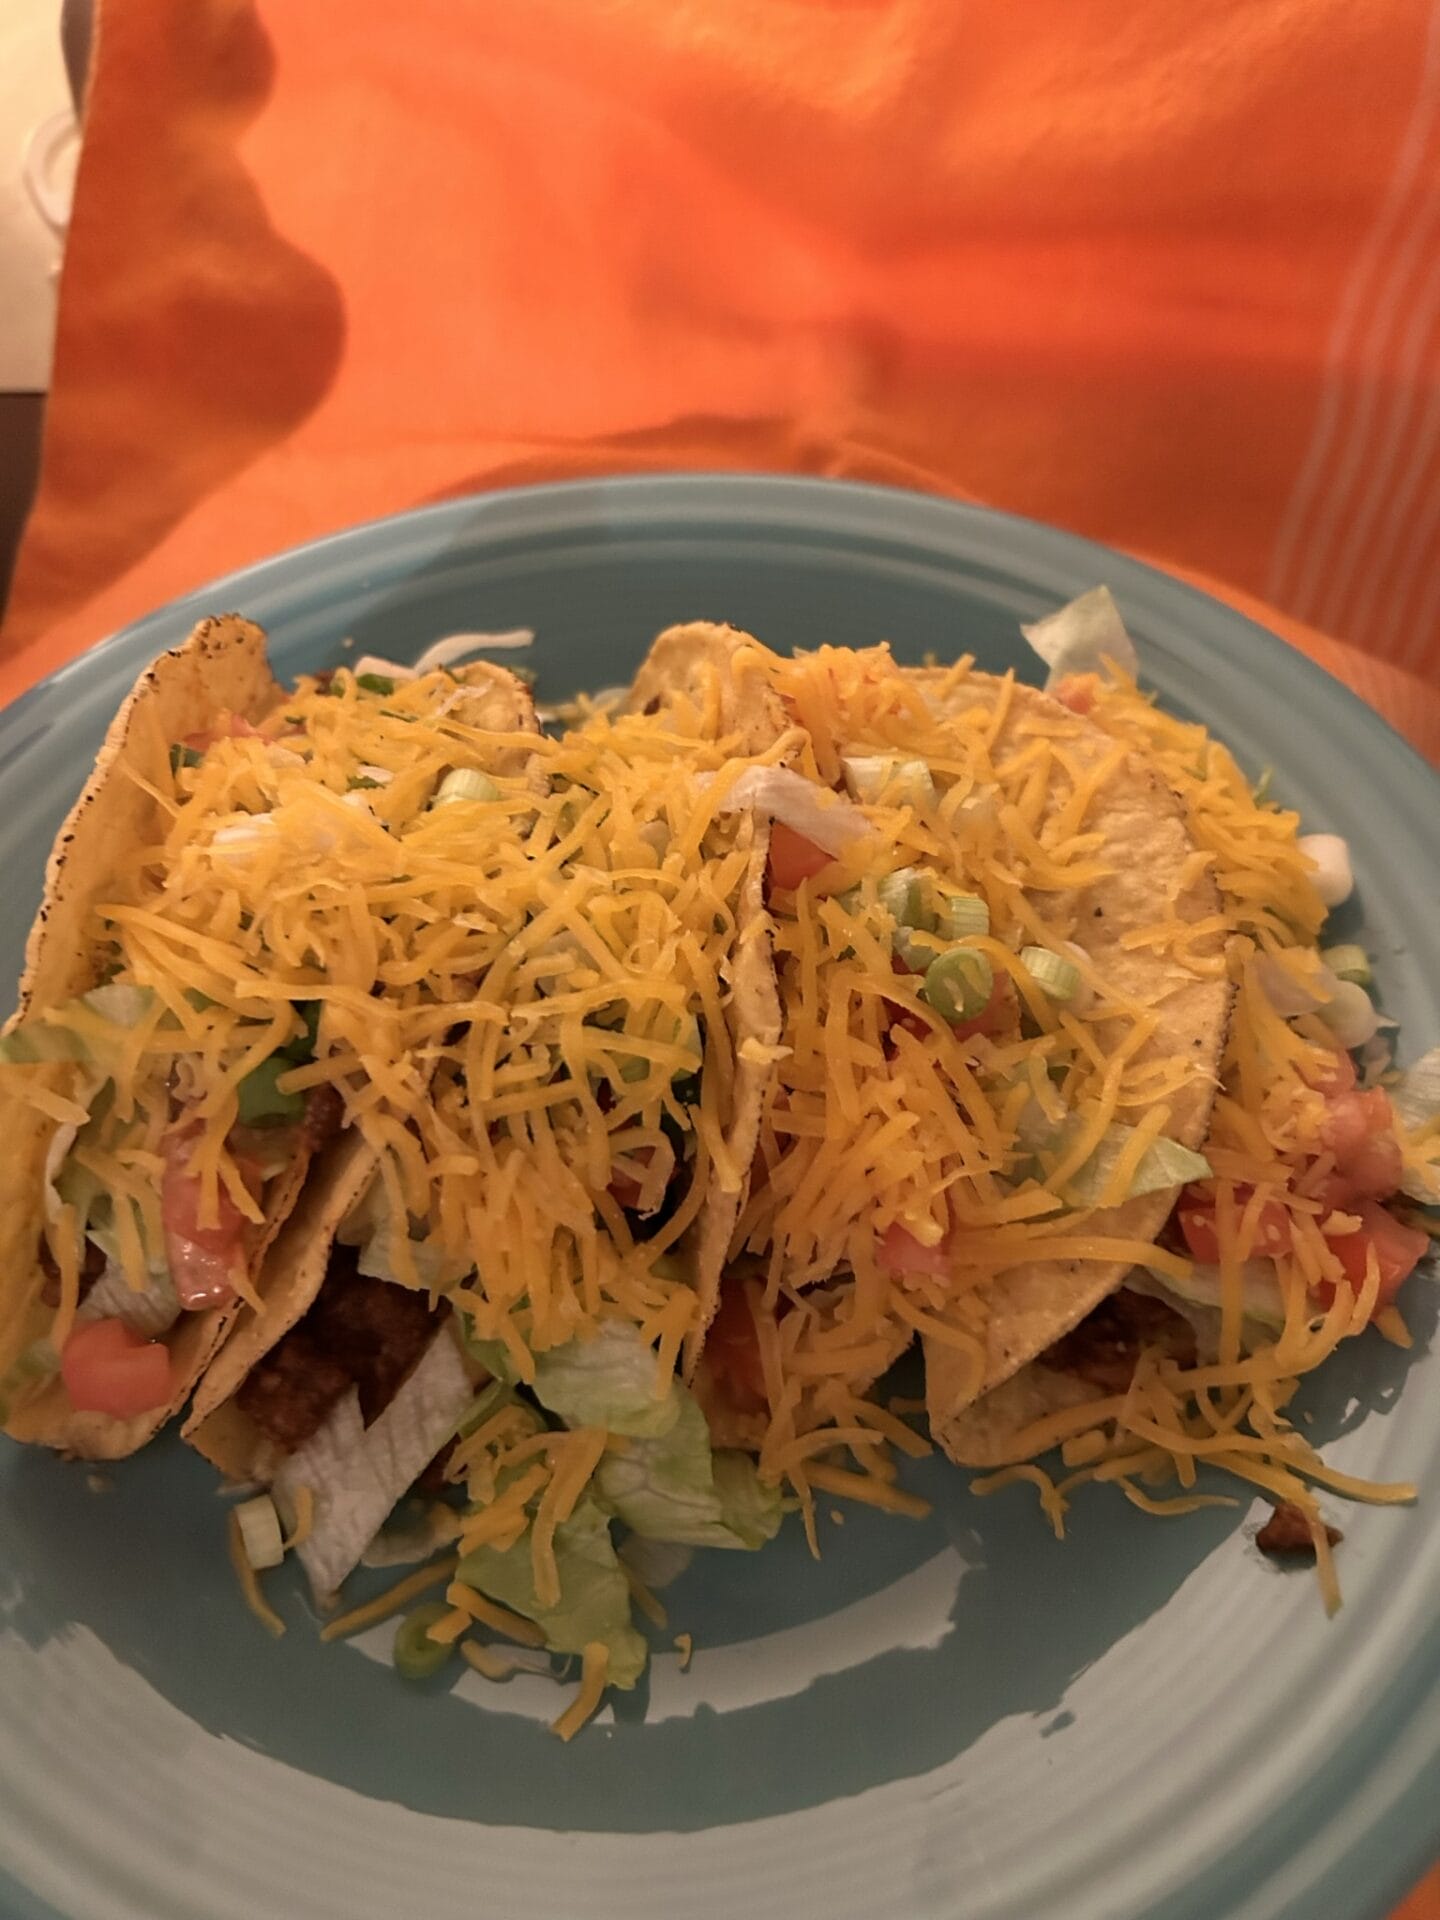 Fully loaded tacos on a blue plate